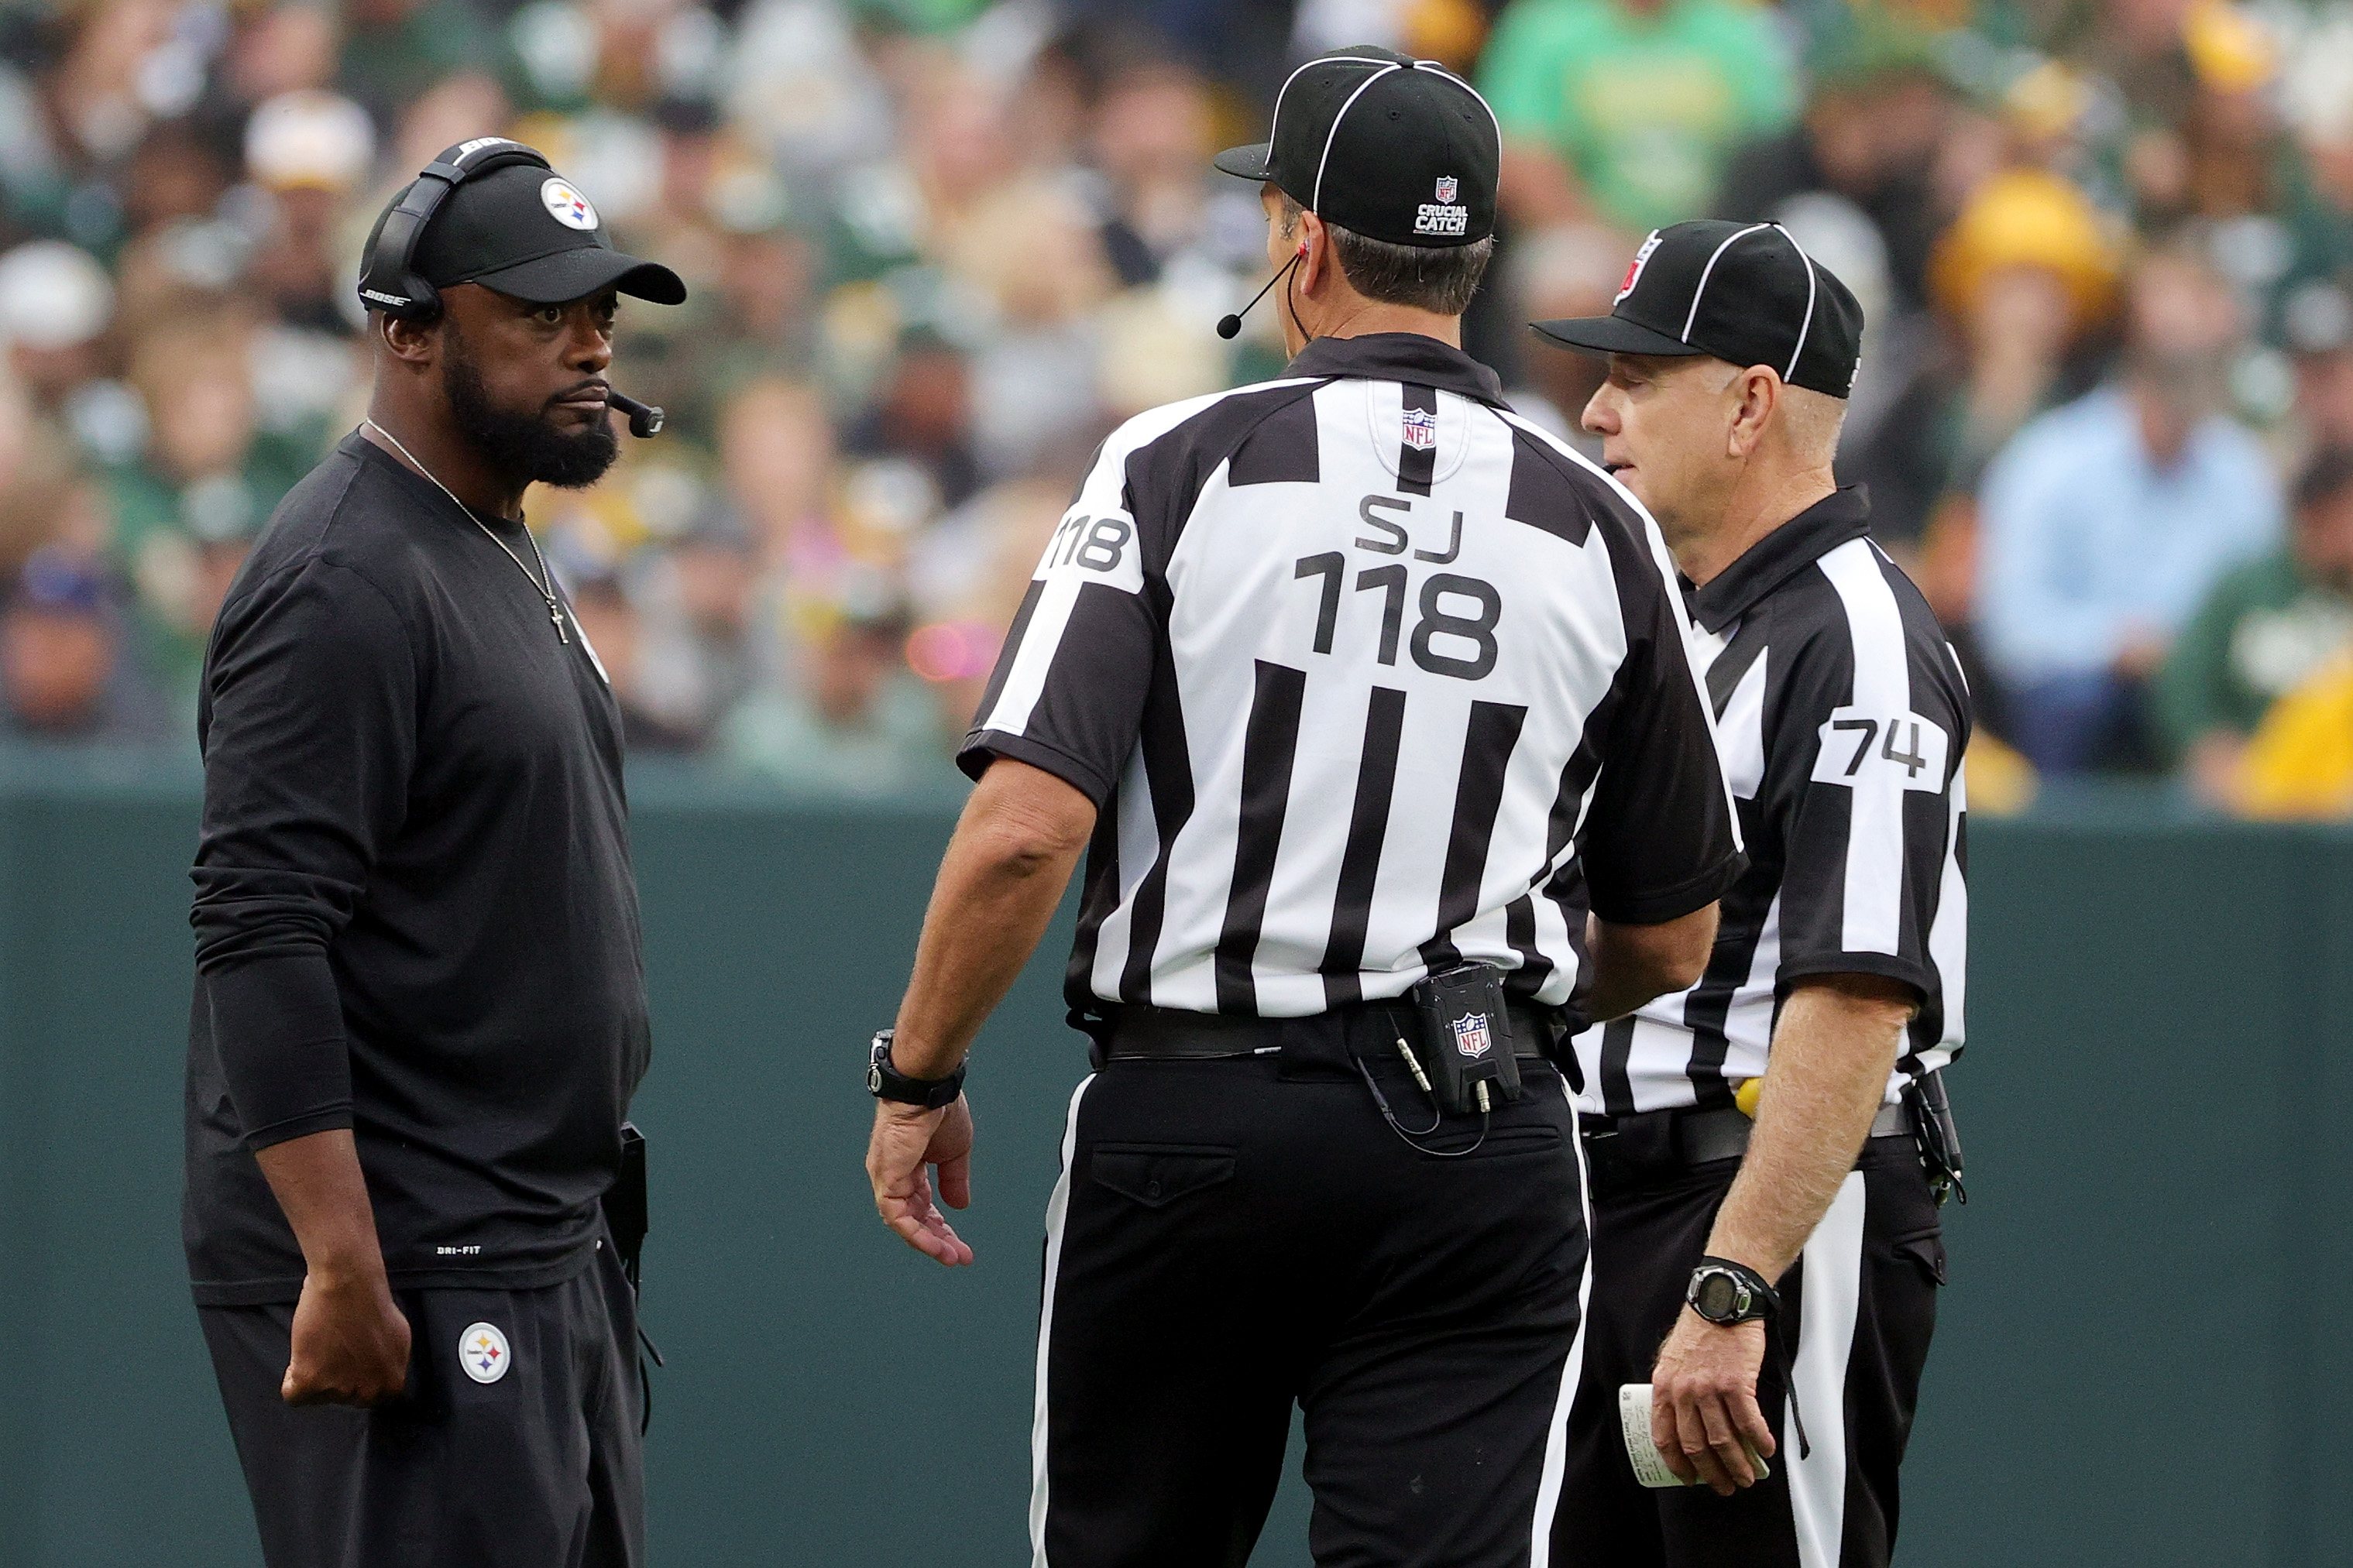 Steelers HC Mike Tomlin talking with officials.